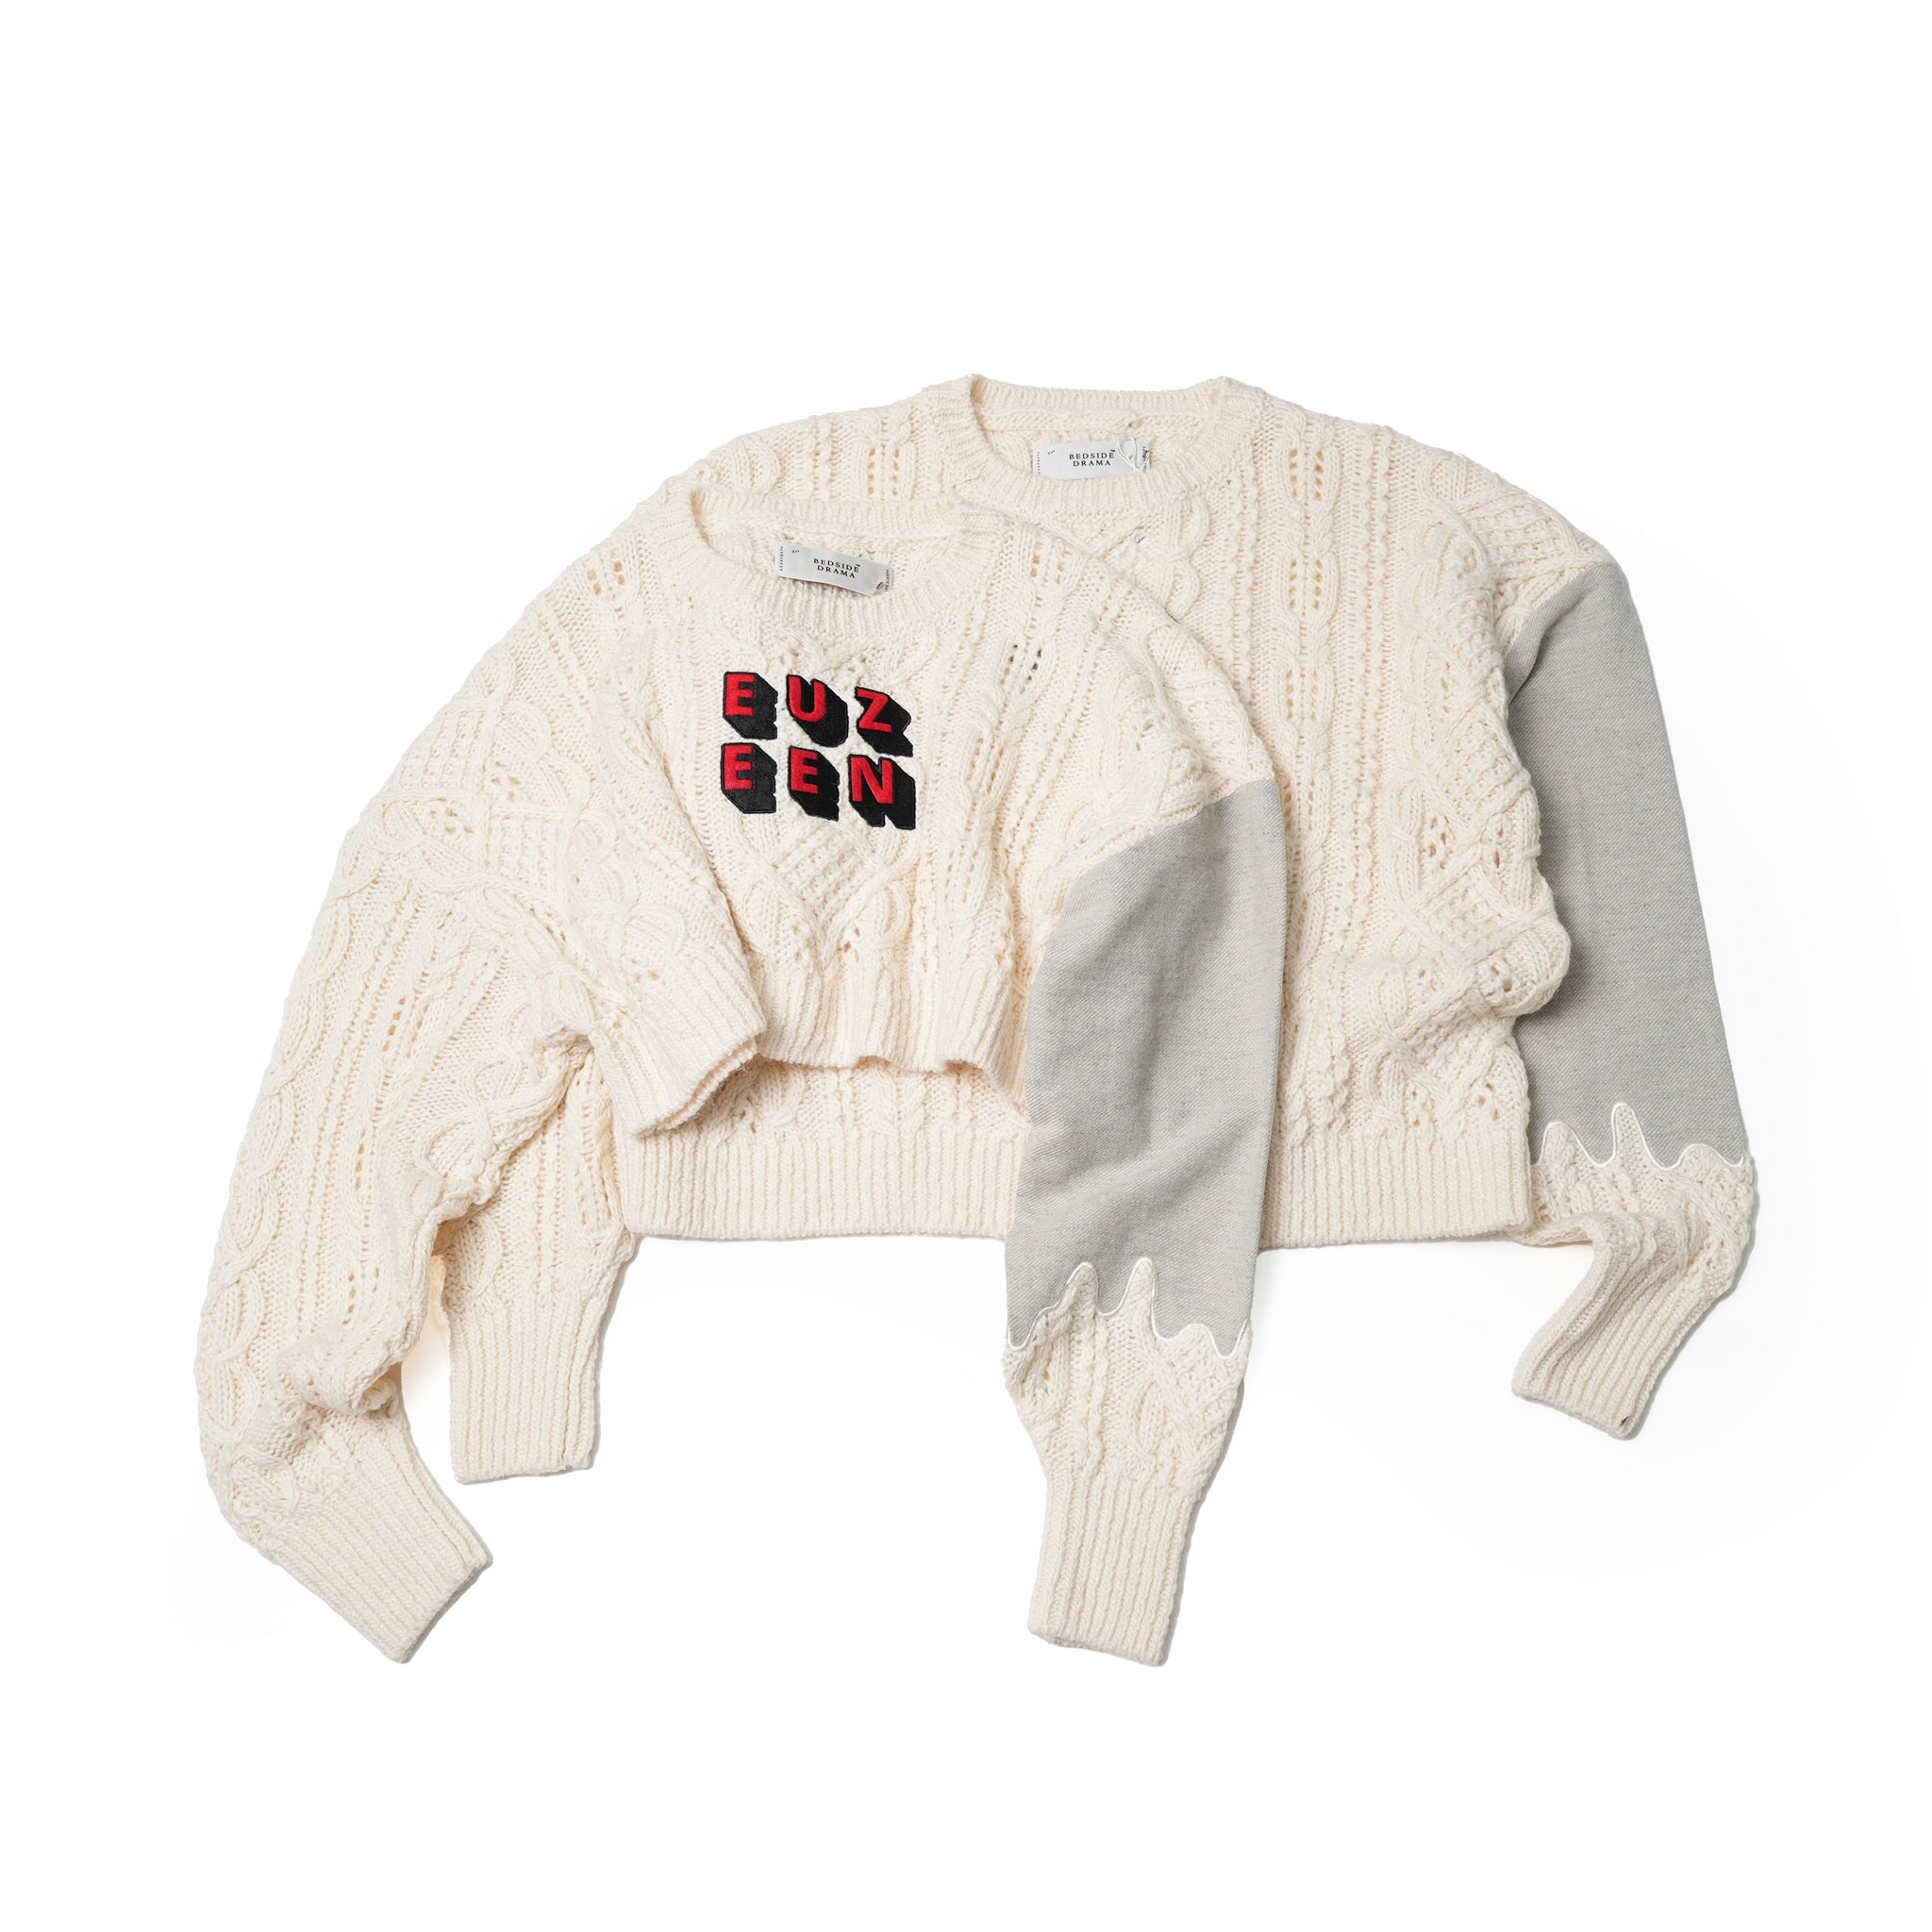 No:bsd23AW-16 | Name:EUZEEN Mix Knit Sweater | Color:Off White